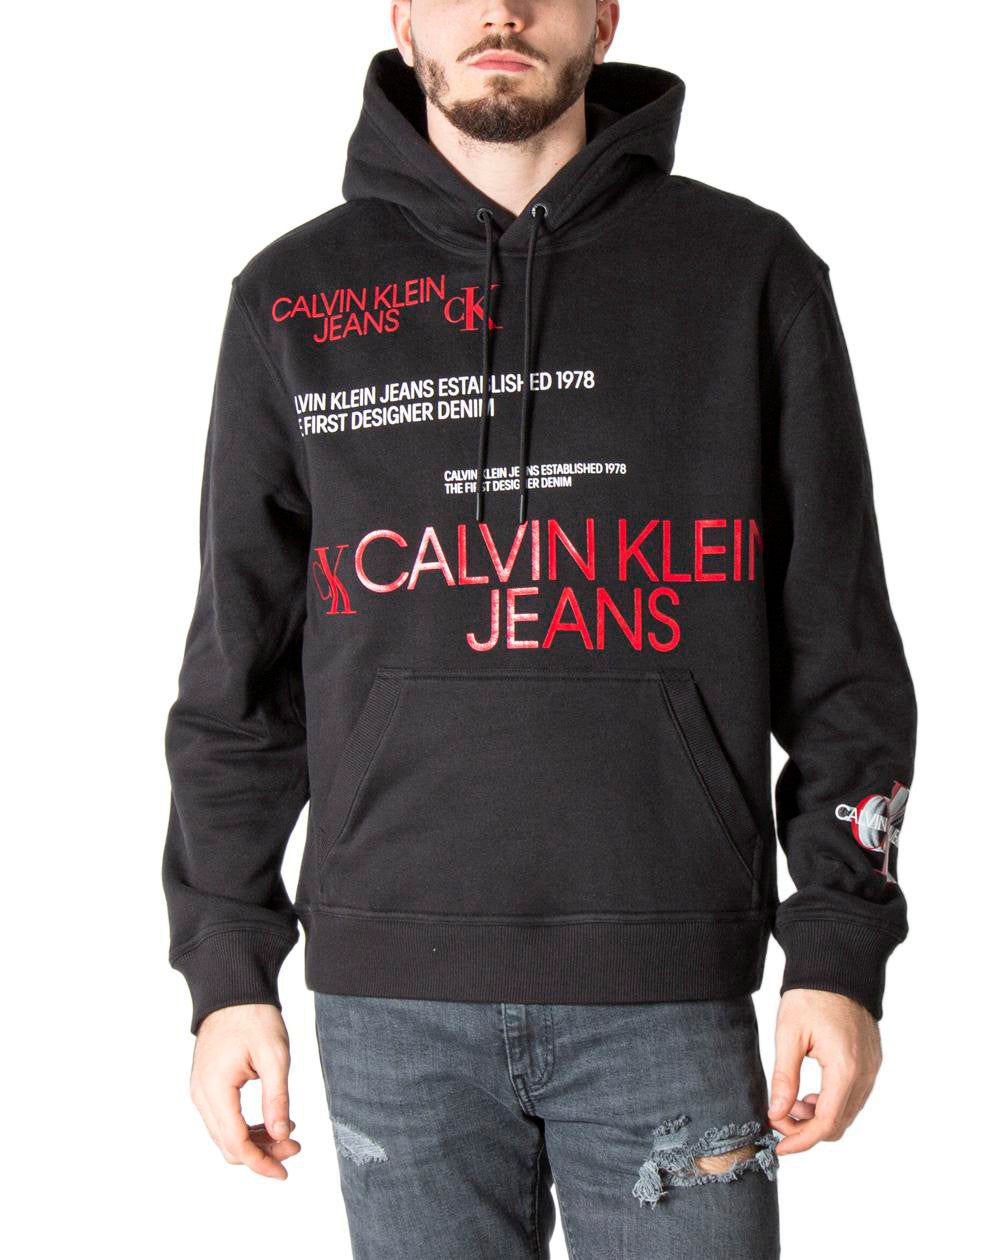 Brand: Calvin Klein Jeans
Gender: Men
Type: Sweatshirts
Season: Fall/Winter

PRODUCT DETAIL
• Color: black
• Pattern: print
• Fastening: slip on
• Sleeves: long

COMPOSITION AND MATERIAL
• Composition: -73% cotton -27% polyester 
•  Washing: machine wash at 30°